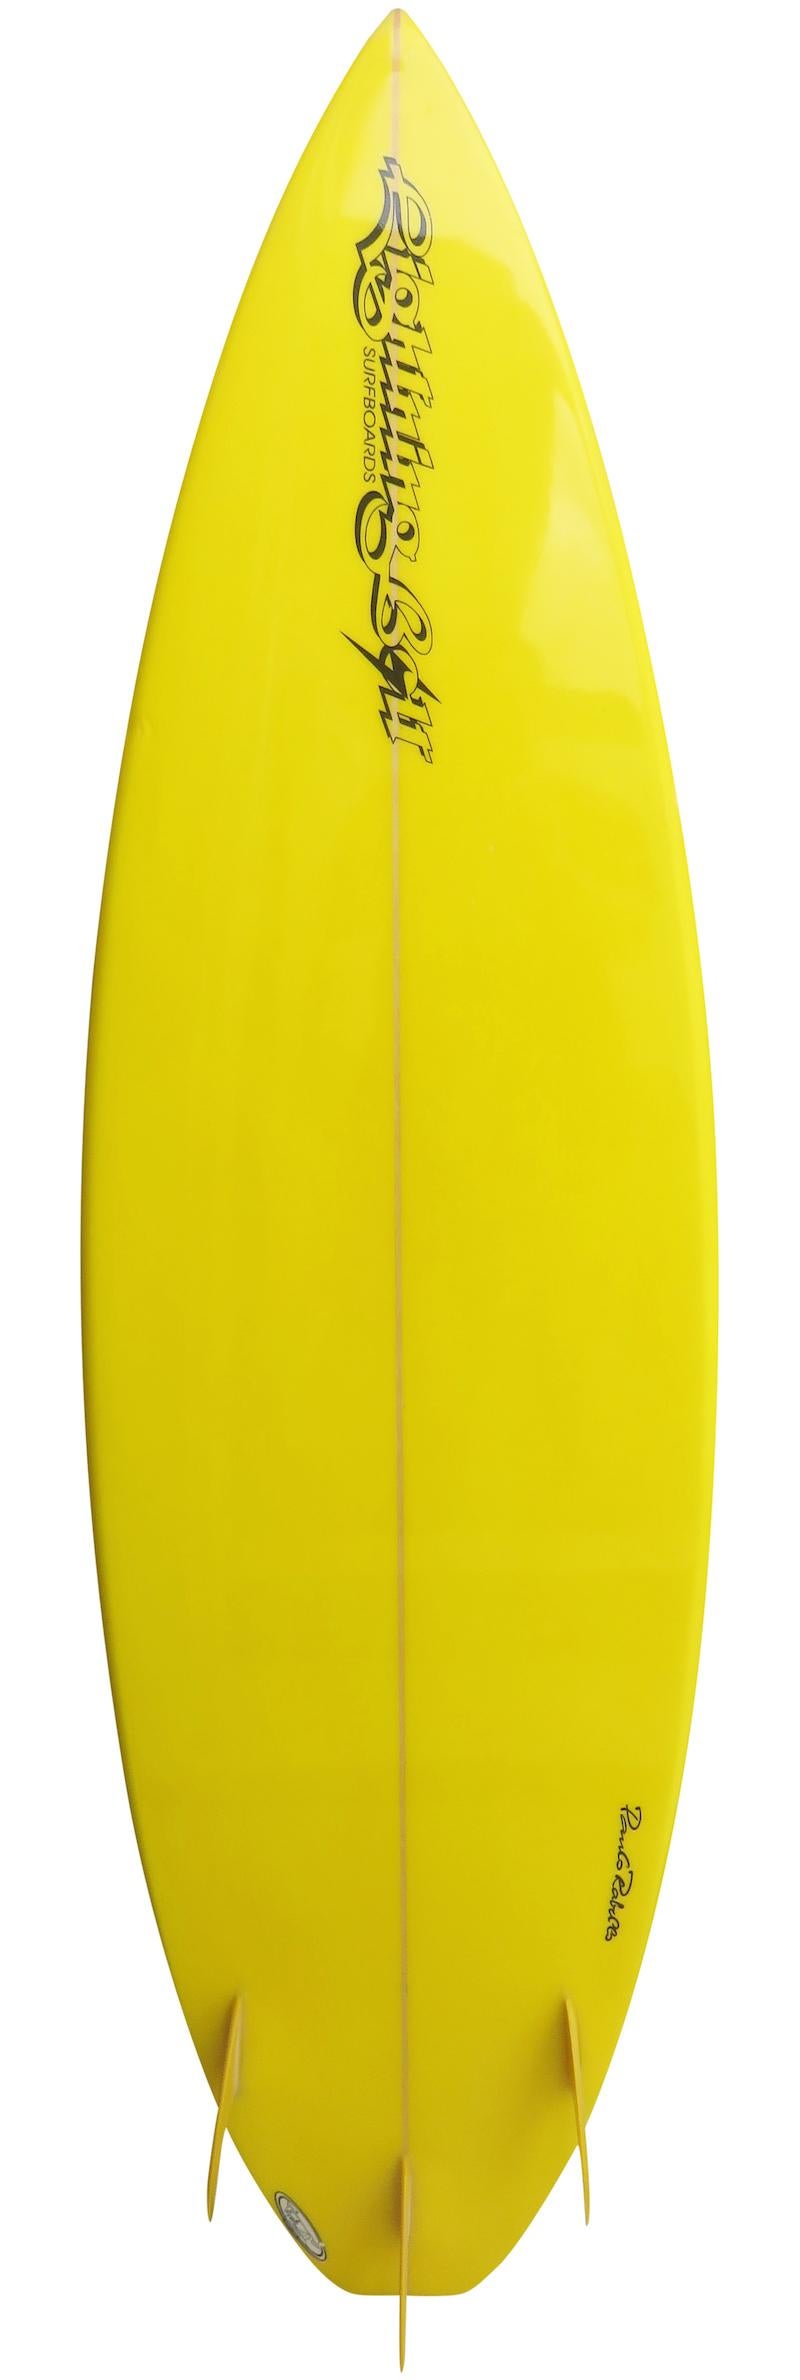 Collectible Lightning Bolt surfboard shaped by Paulo Rabello in São Paulo, Brazil. Featuring a beautiful yellow with red lightning bolt color scheme and glassed on thruster (tri-fin) setup. This collectible shortboard remains in all original